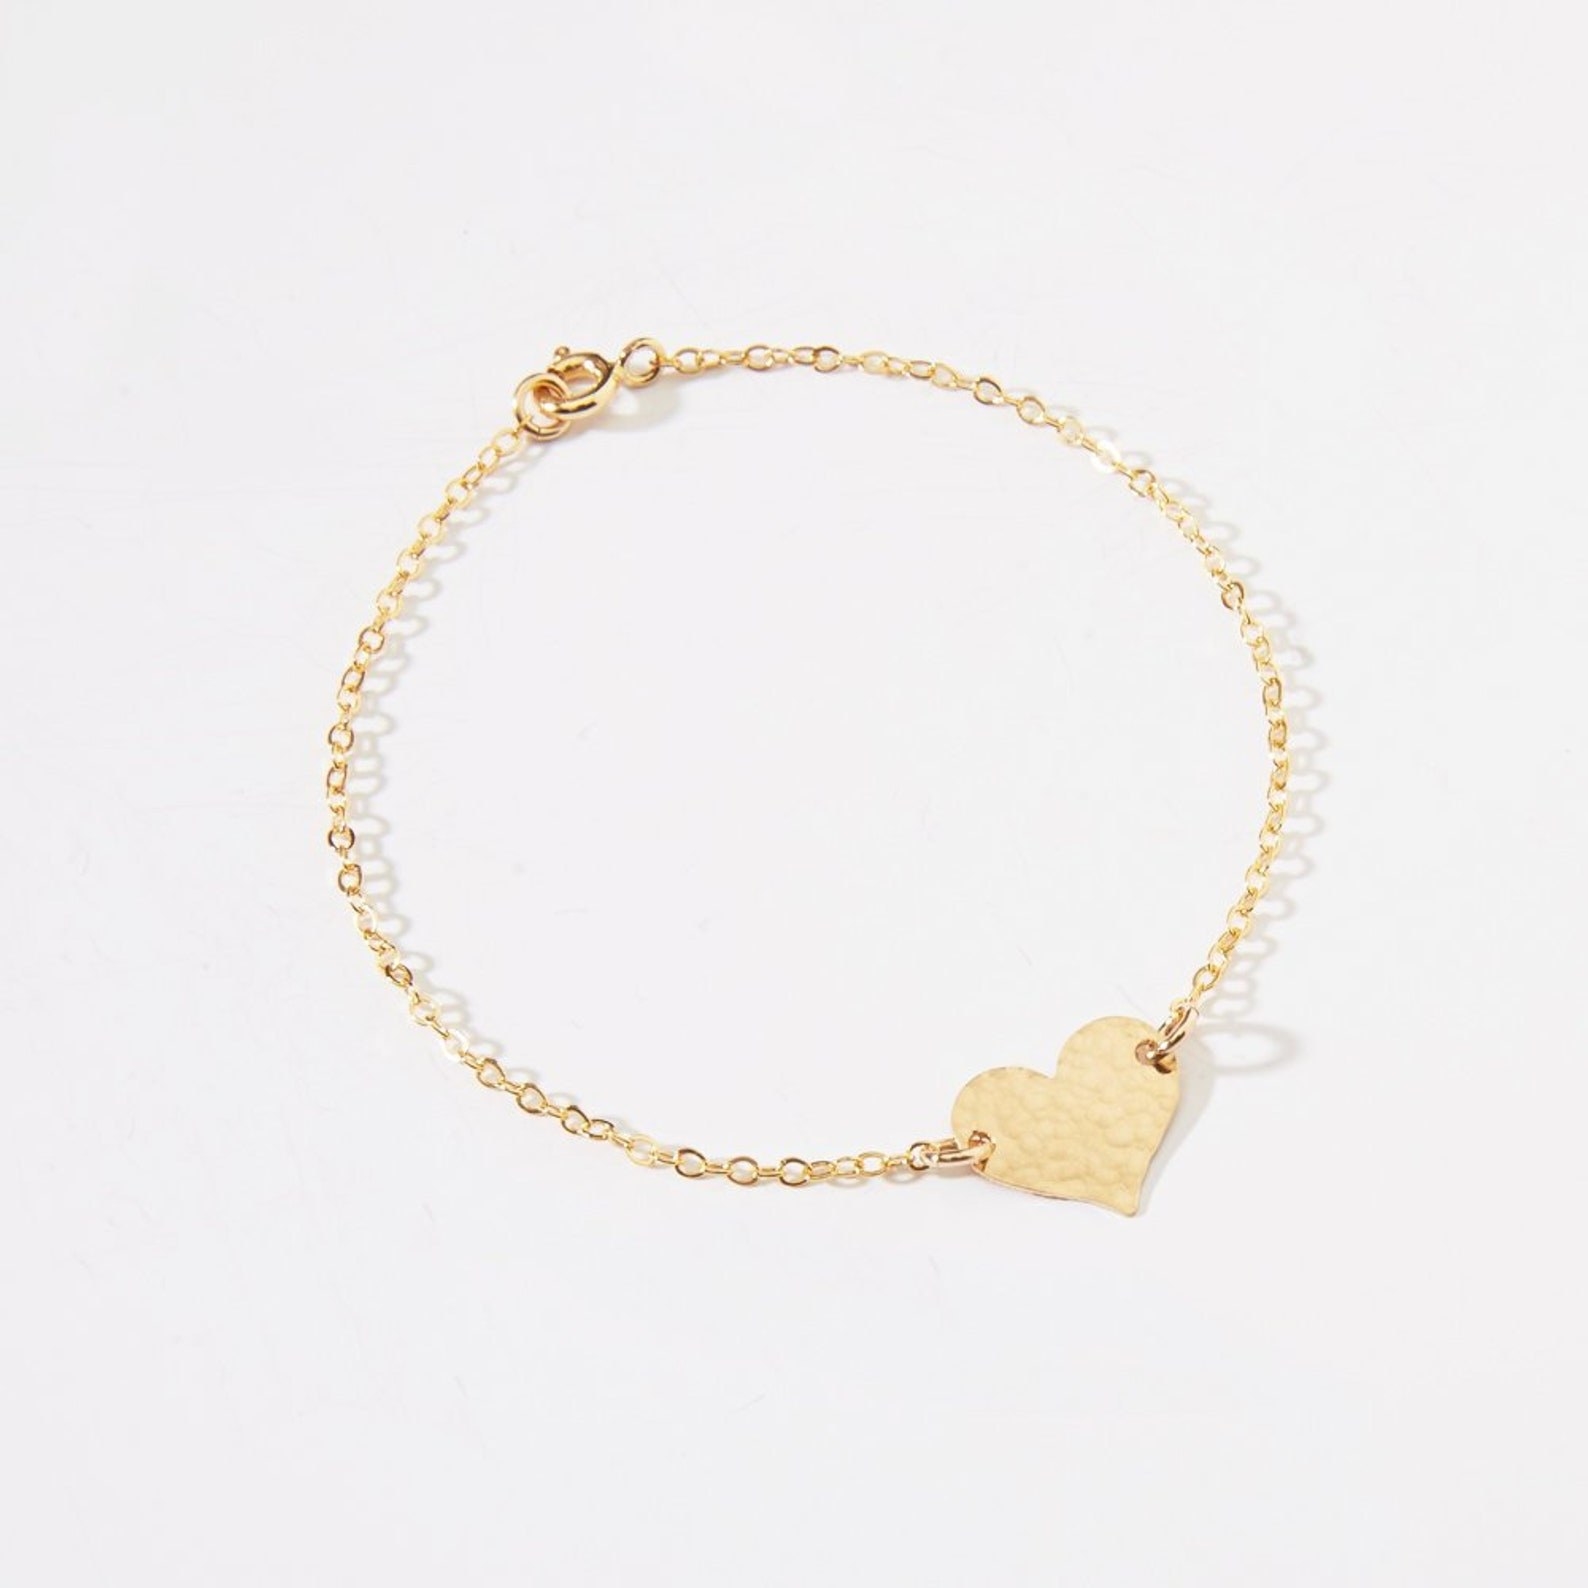 A golden bracelet with a small heart charm.